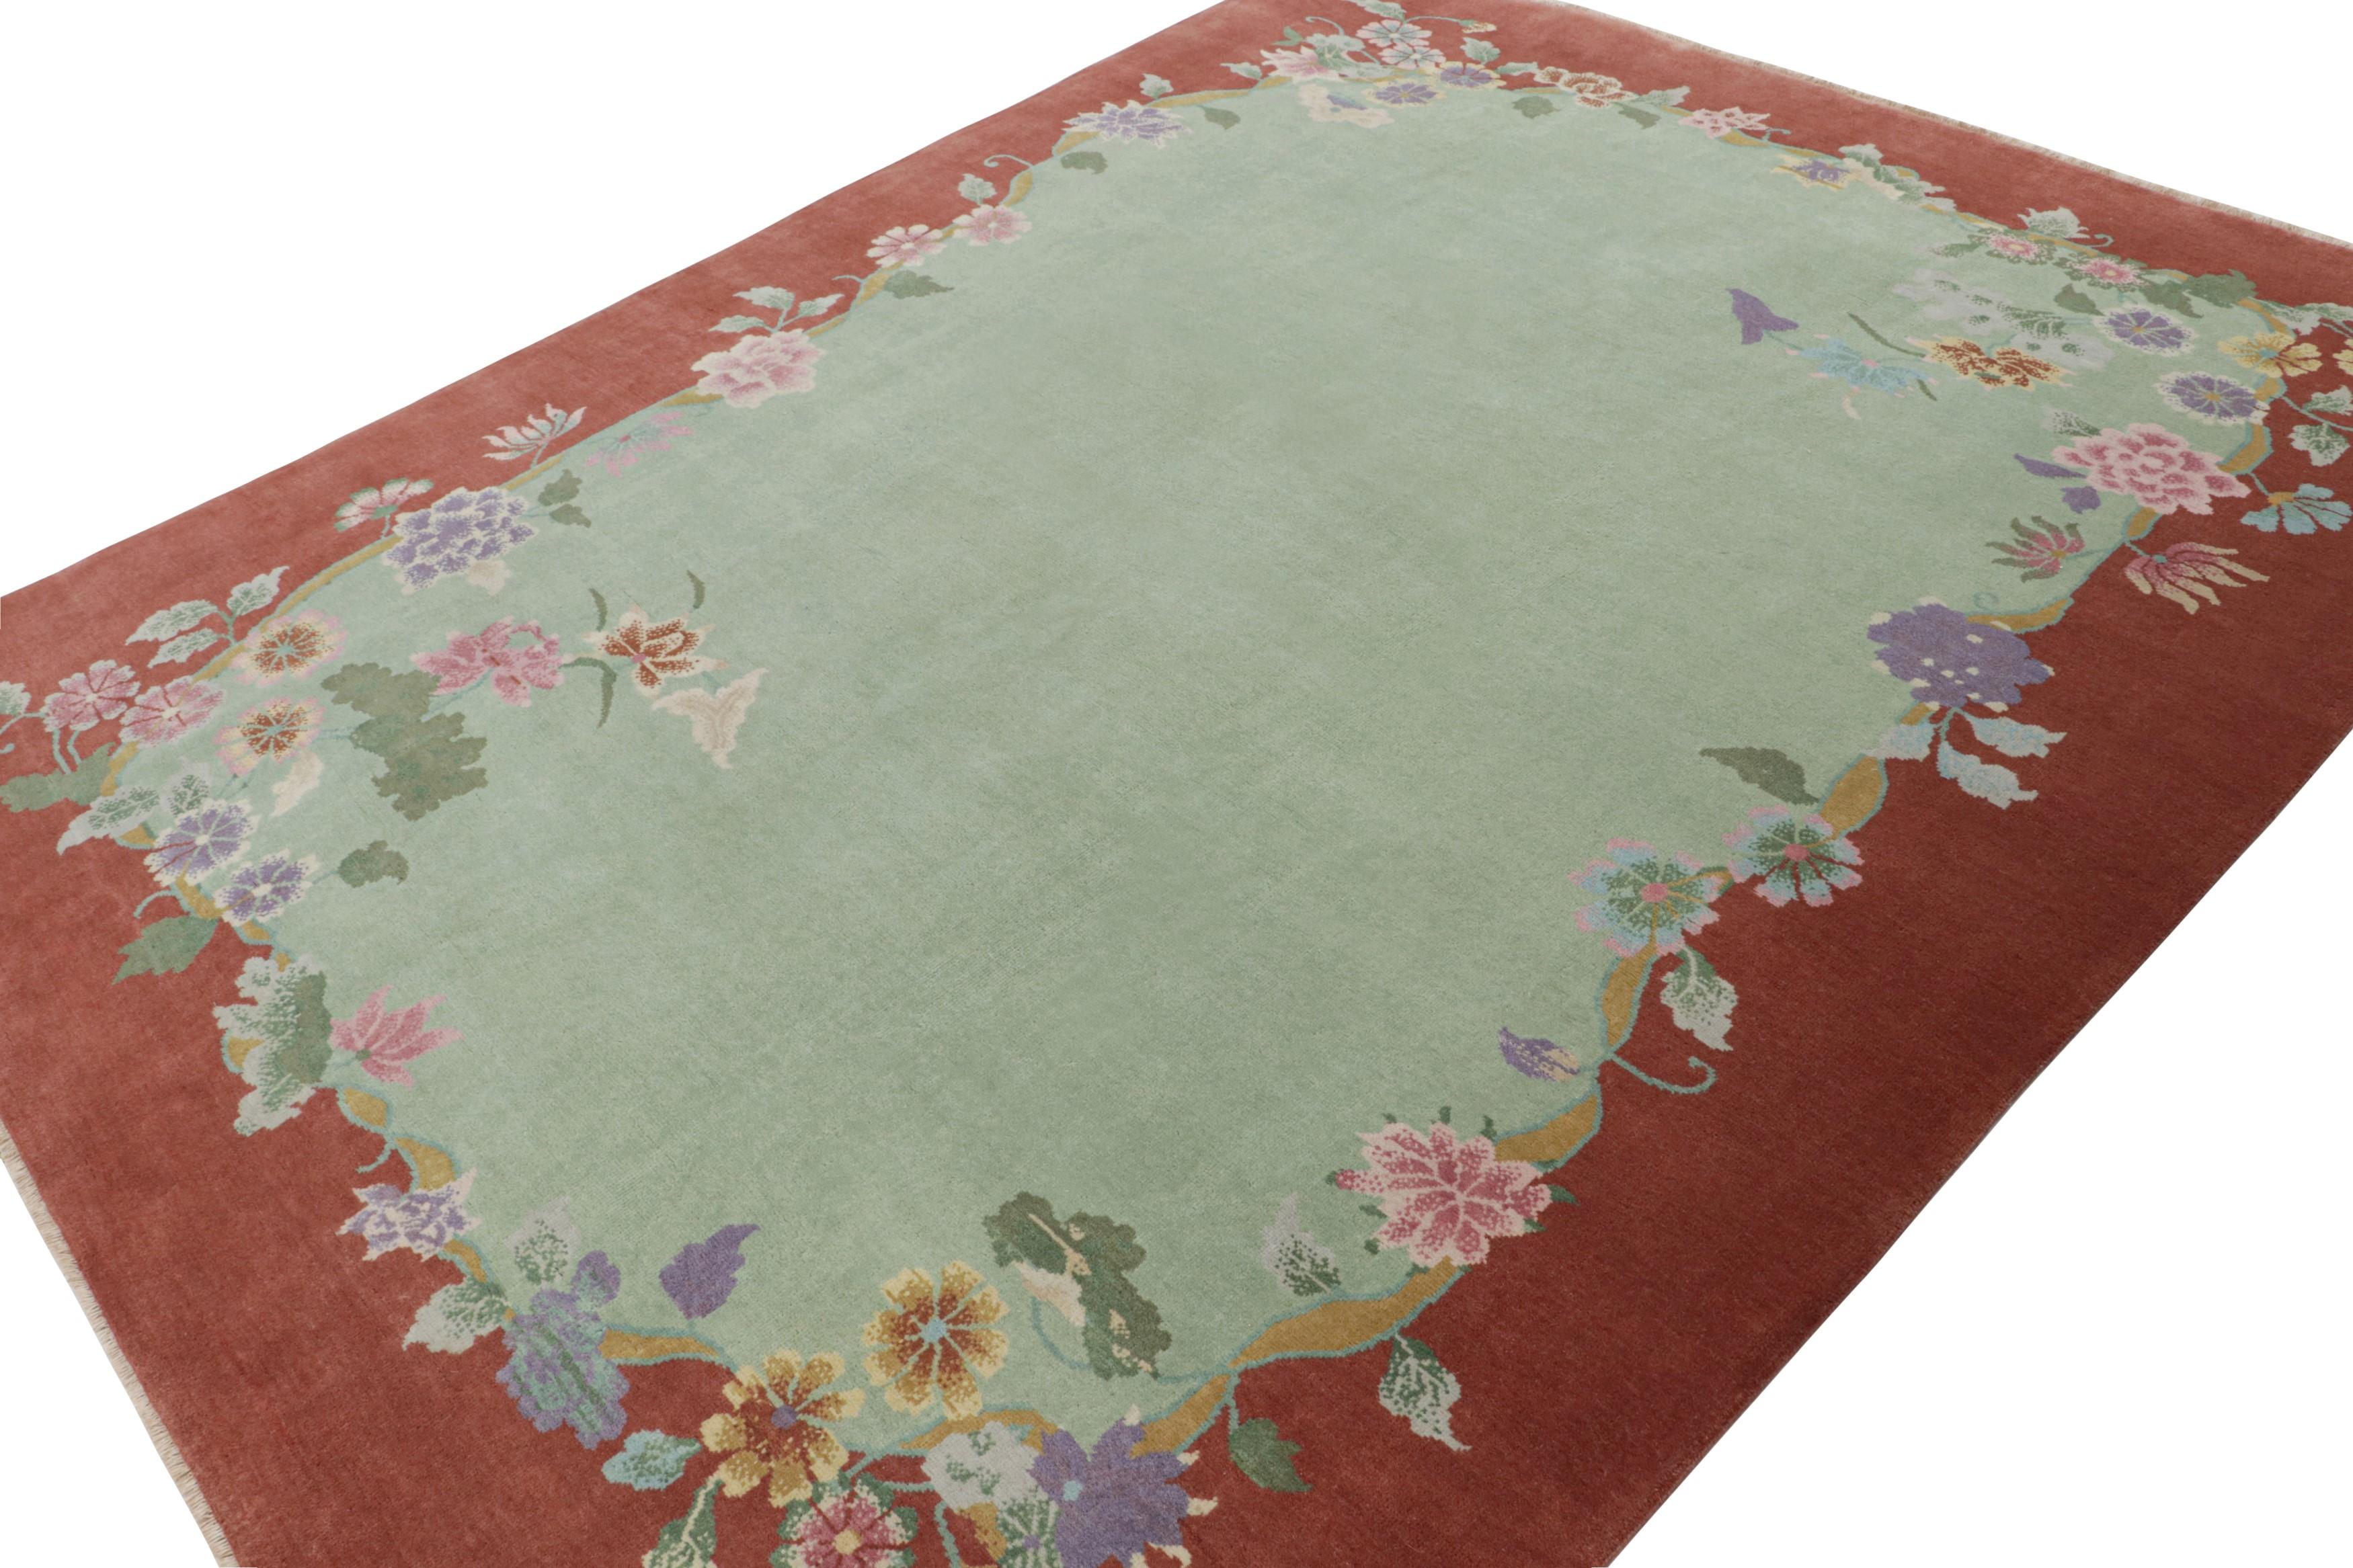 Hand knotted in wool, an 8x10 Chinese art deco style rug inspired by rare period pieces of the 1920s Nichols style. 

On the Design: 

The design boasts a bold open field from this period. The field & the surrounding floral patterns enjoy a play of